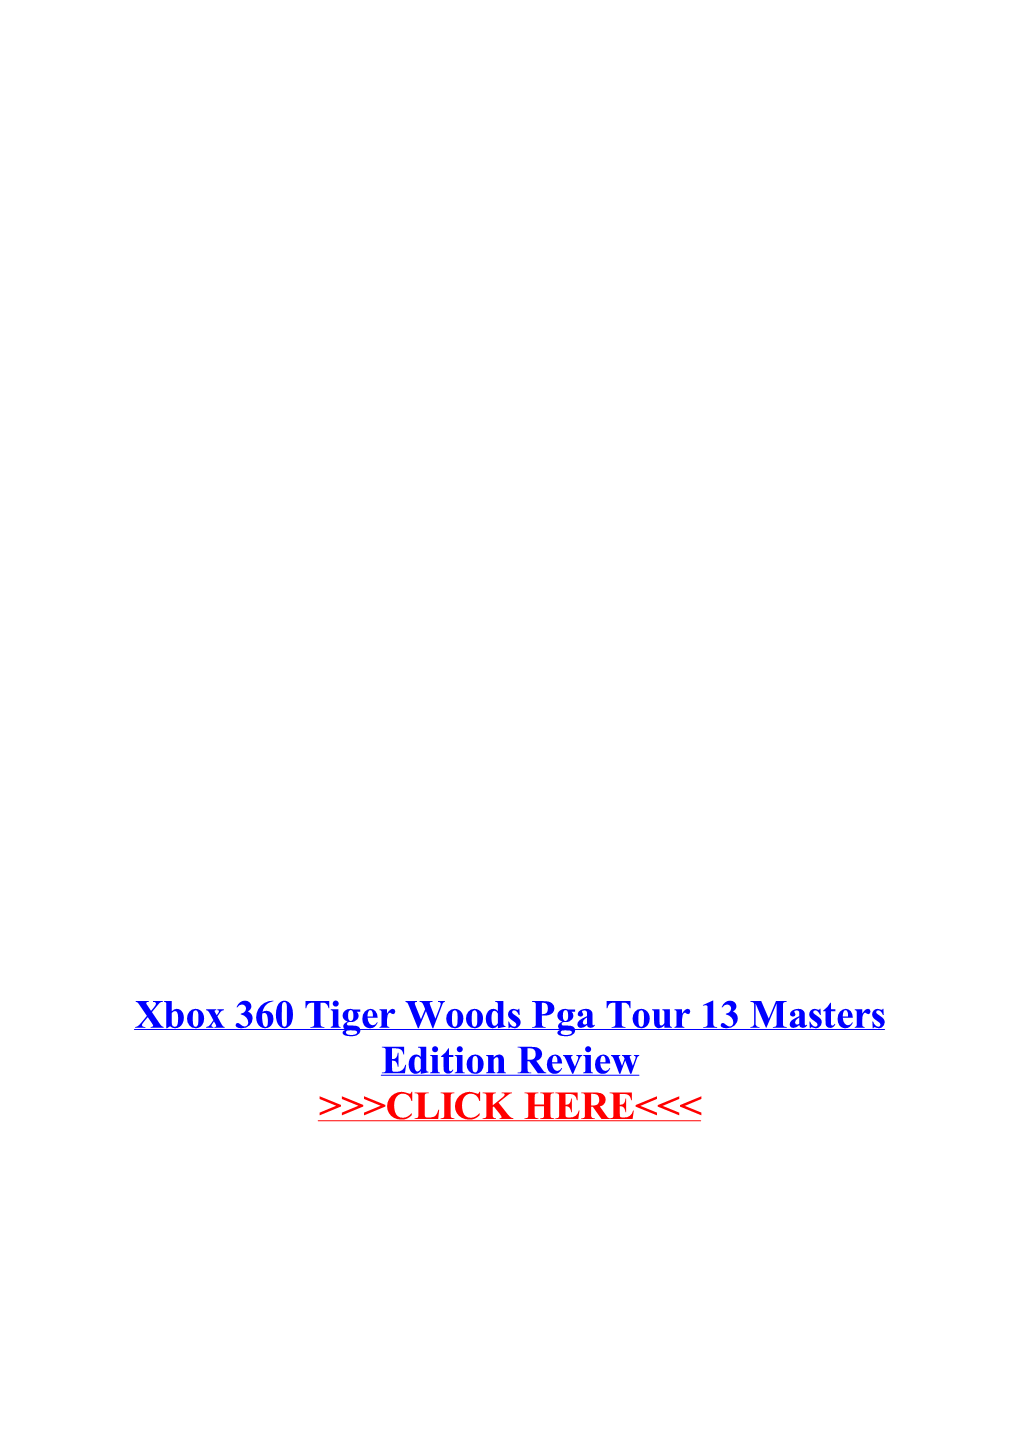 Xbox 360 Tiger Woods Pga Tour 13 Masters Edition Review